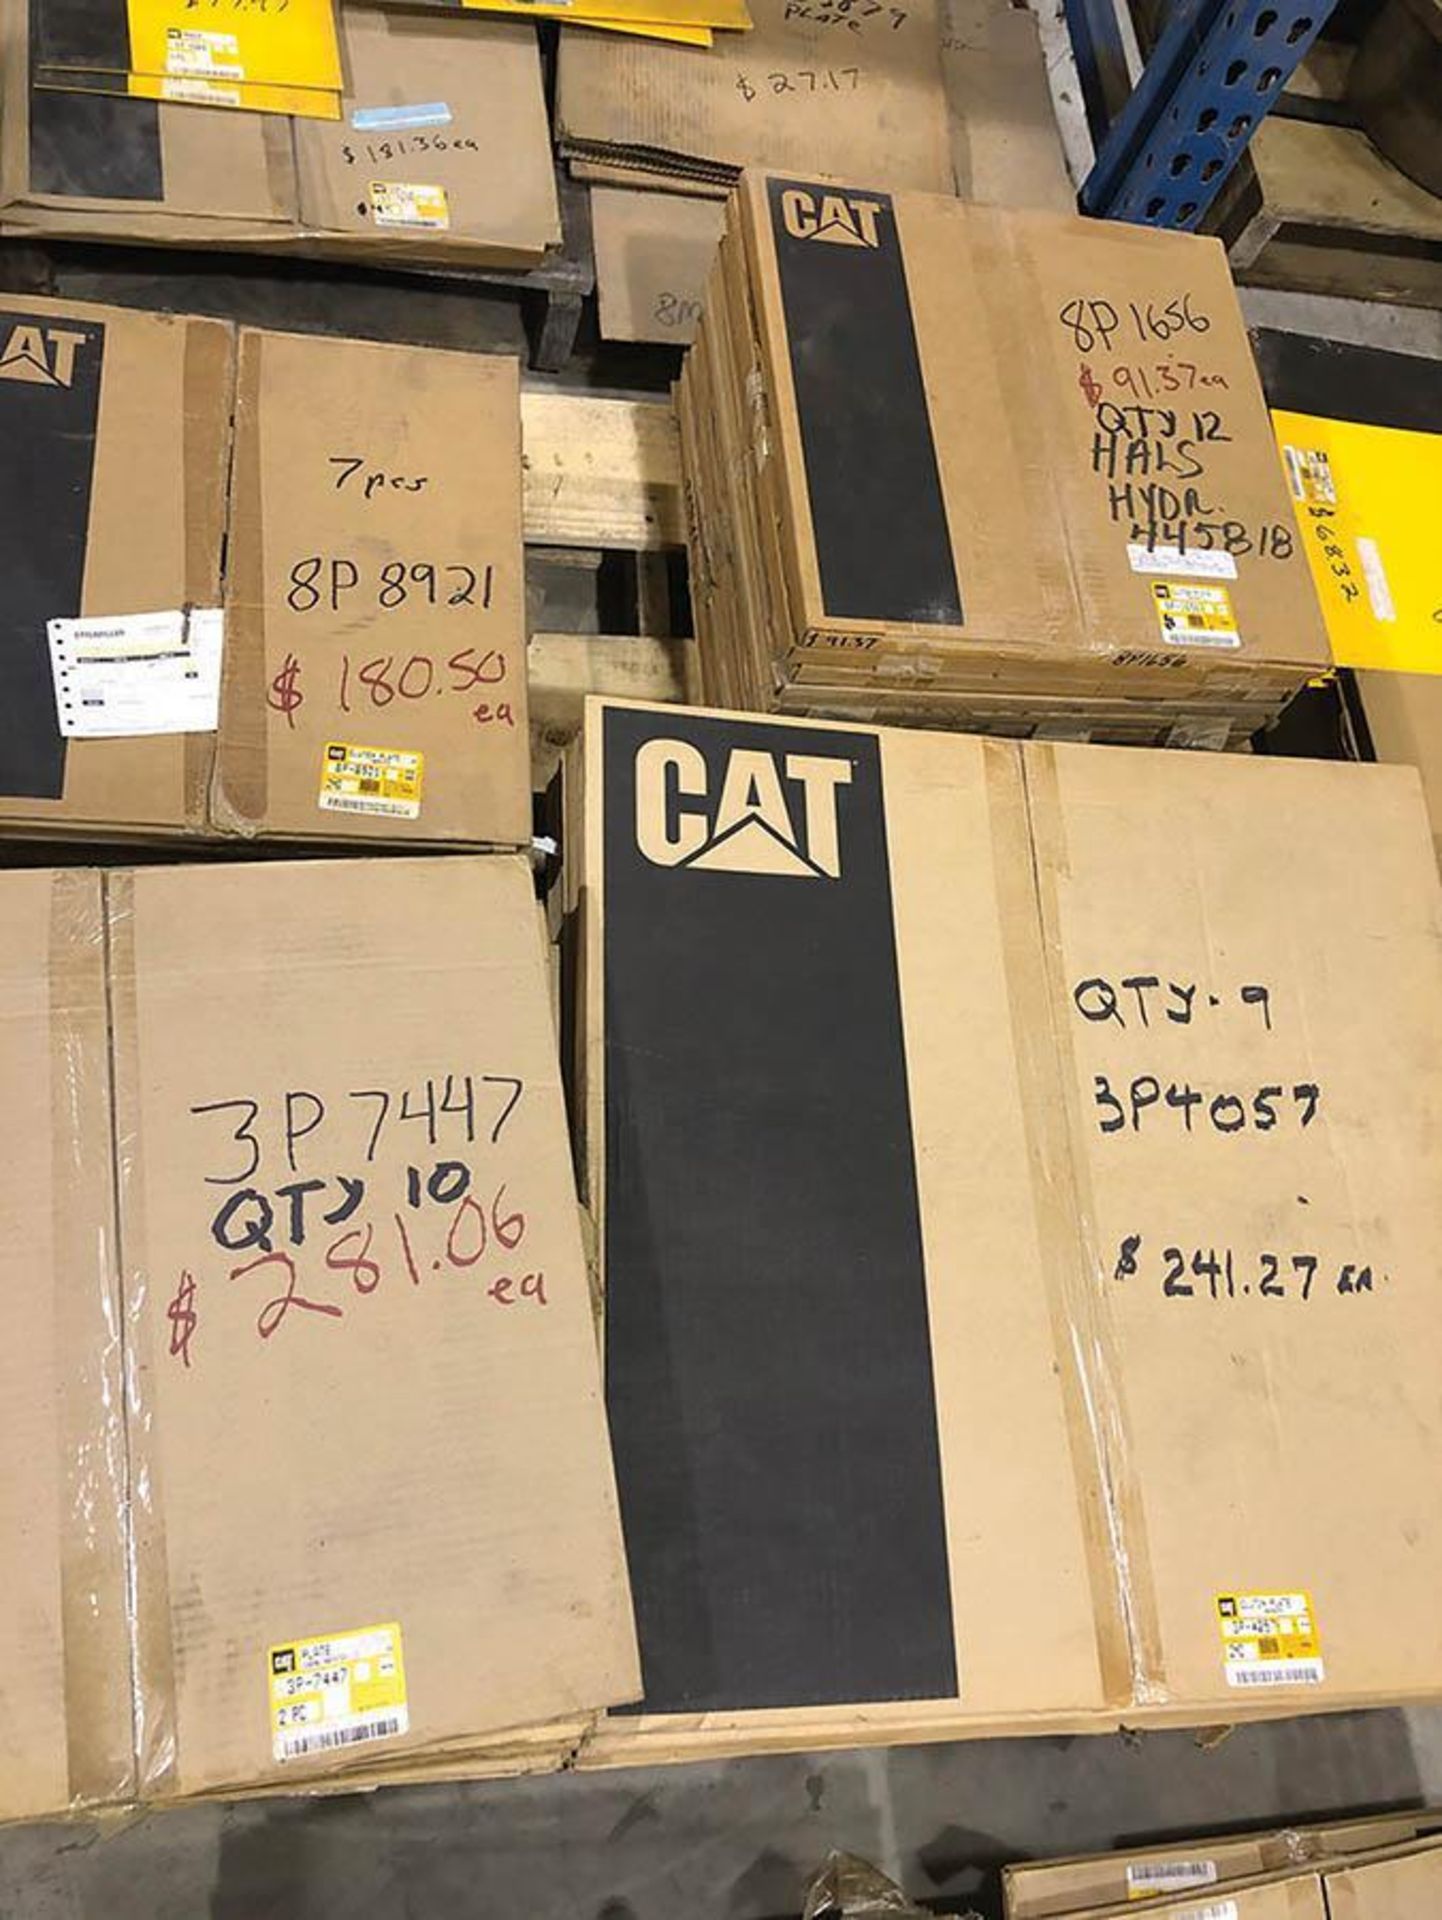 SKID OF NEW CATERPILLAR PLATES AND DISC